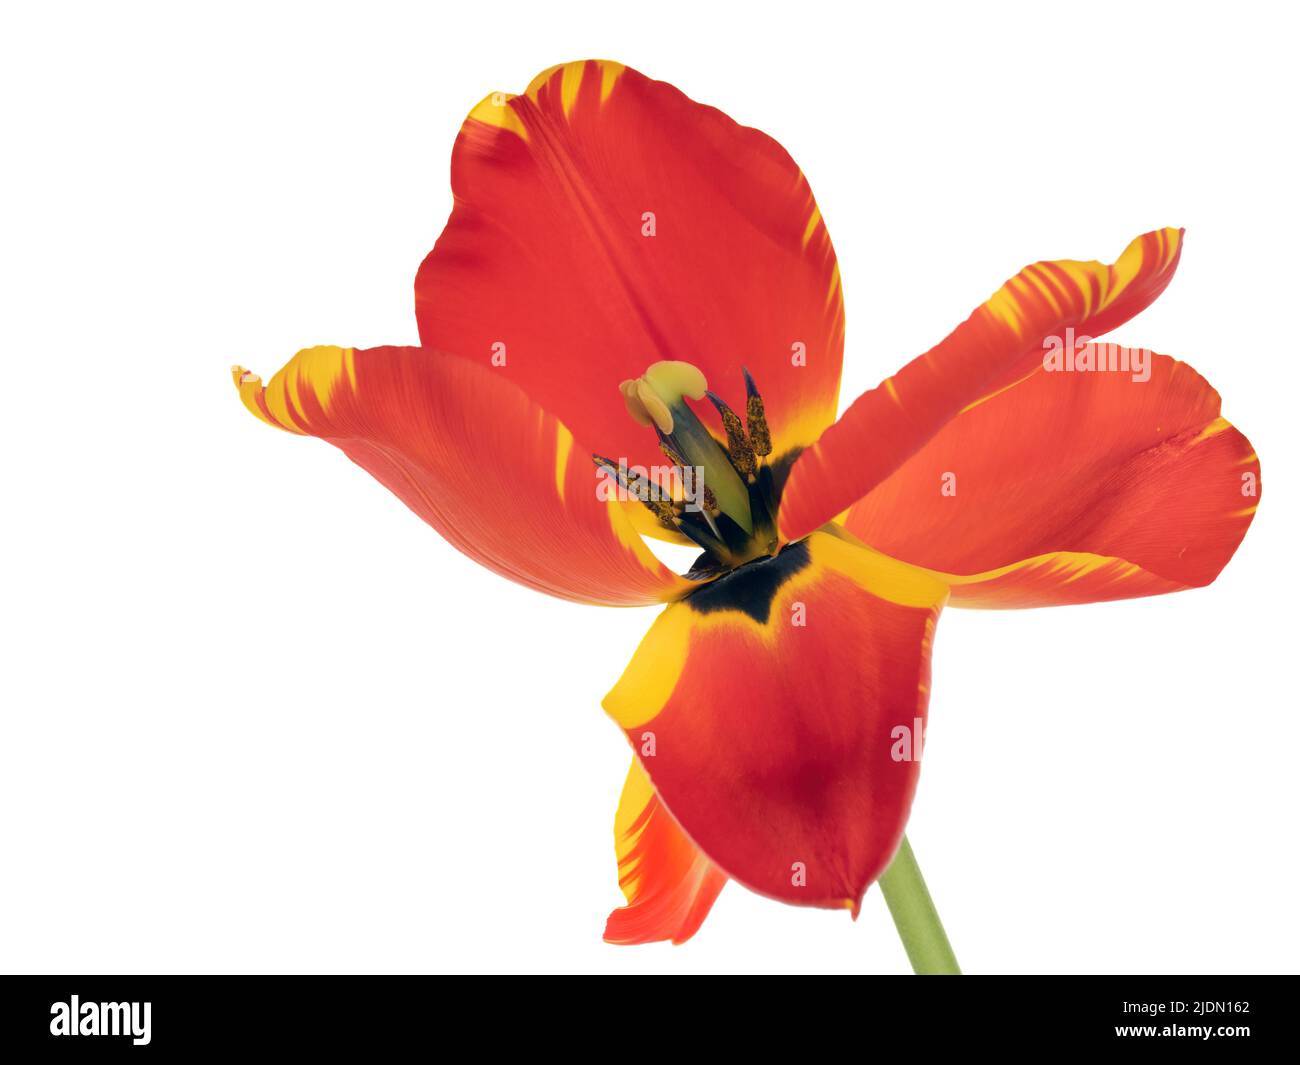 View inside red and yellow tulip flower to reveal stamens etc. Isolated on white. Stock Photo